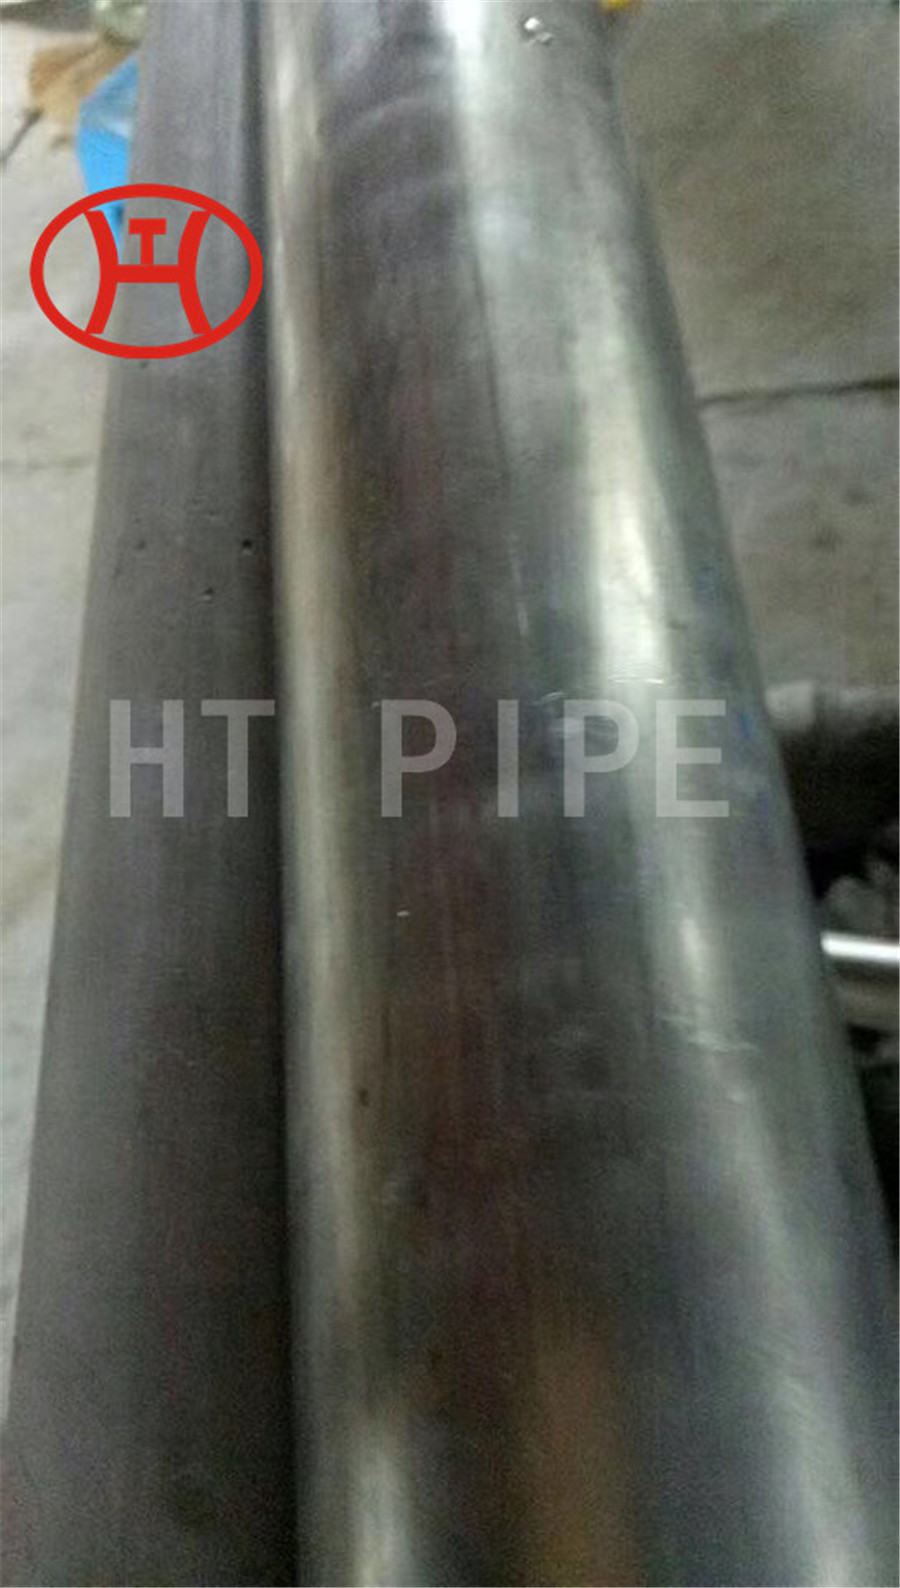 Duplex steel S31803 pipe ASTM A789 tube smls